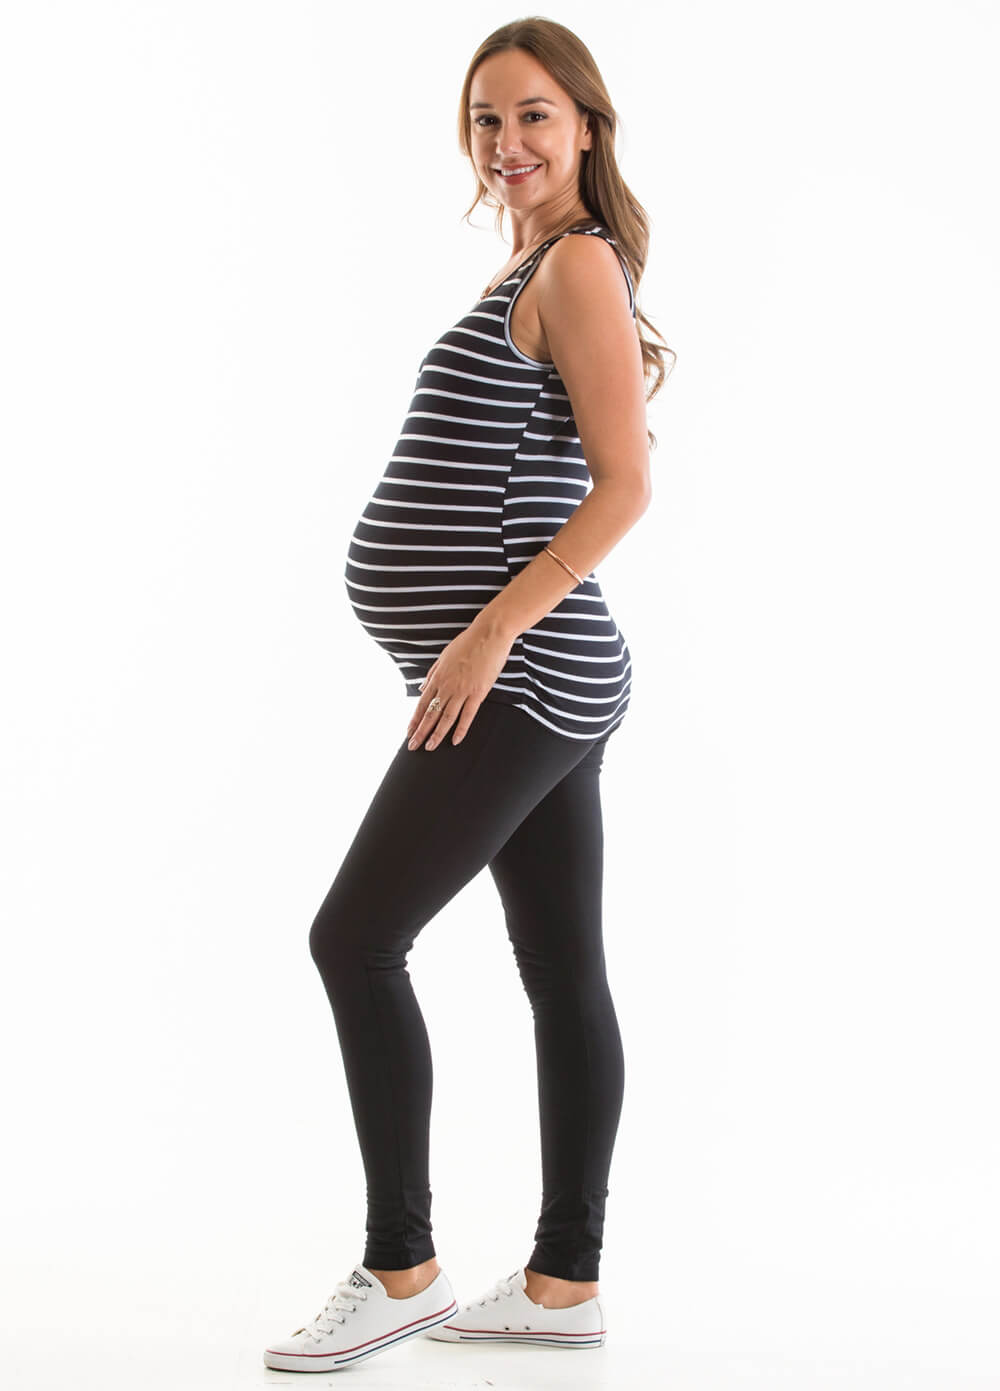 Arles Maternity Tank Top in Black Stripes by Lait & Co